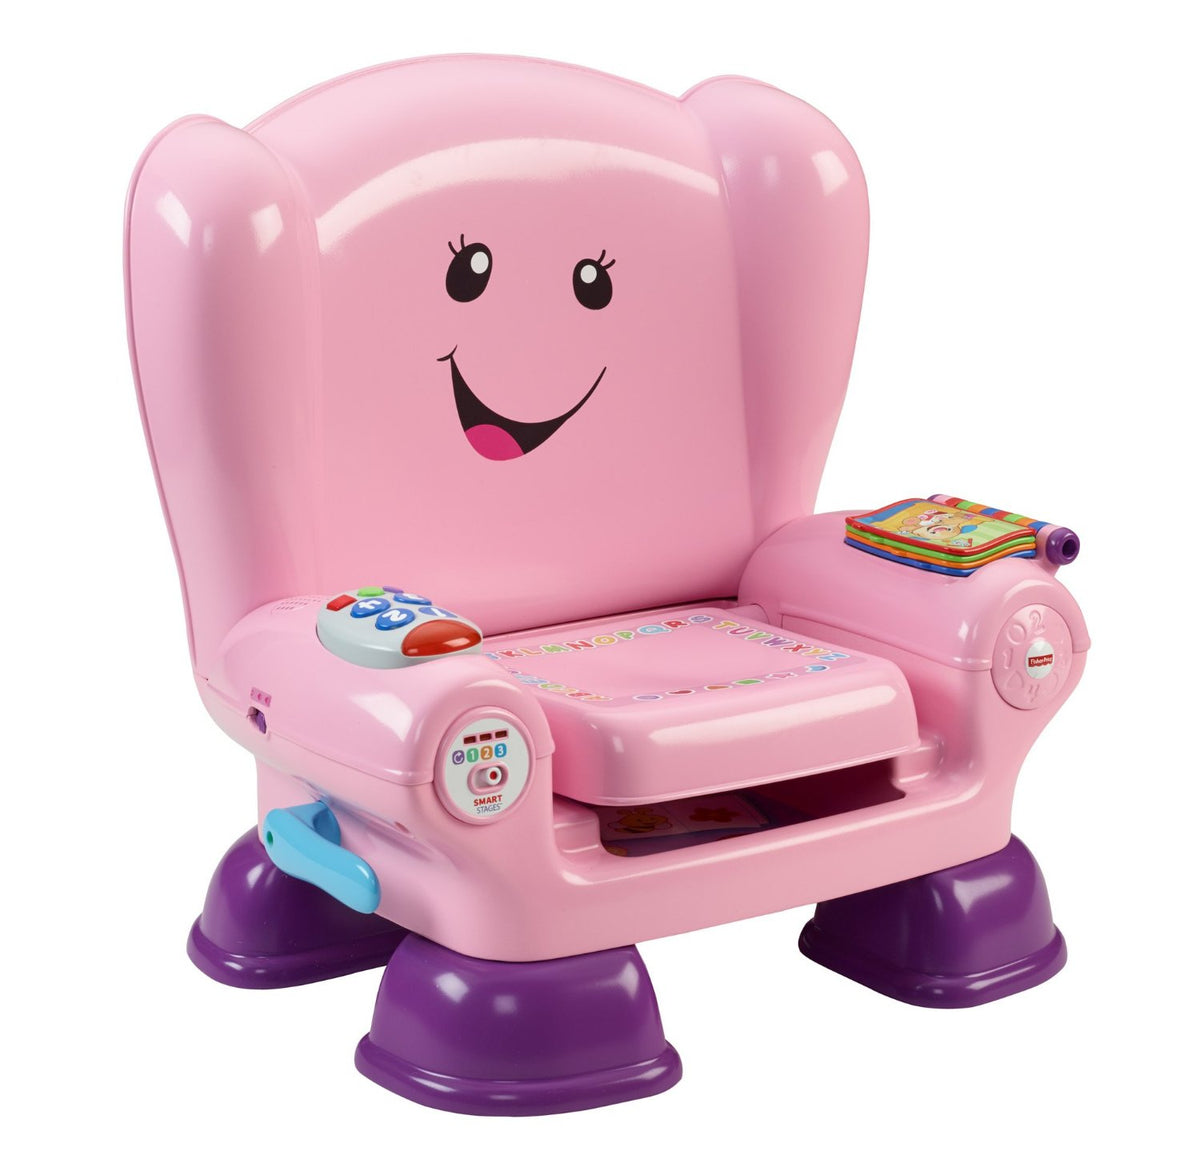 Fisher-Price Laugh & Learn Game & Learn Controller Pink Toy Baby